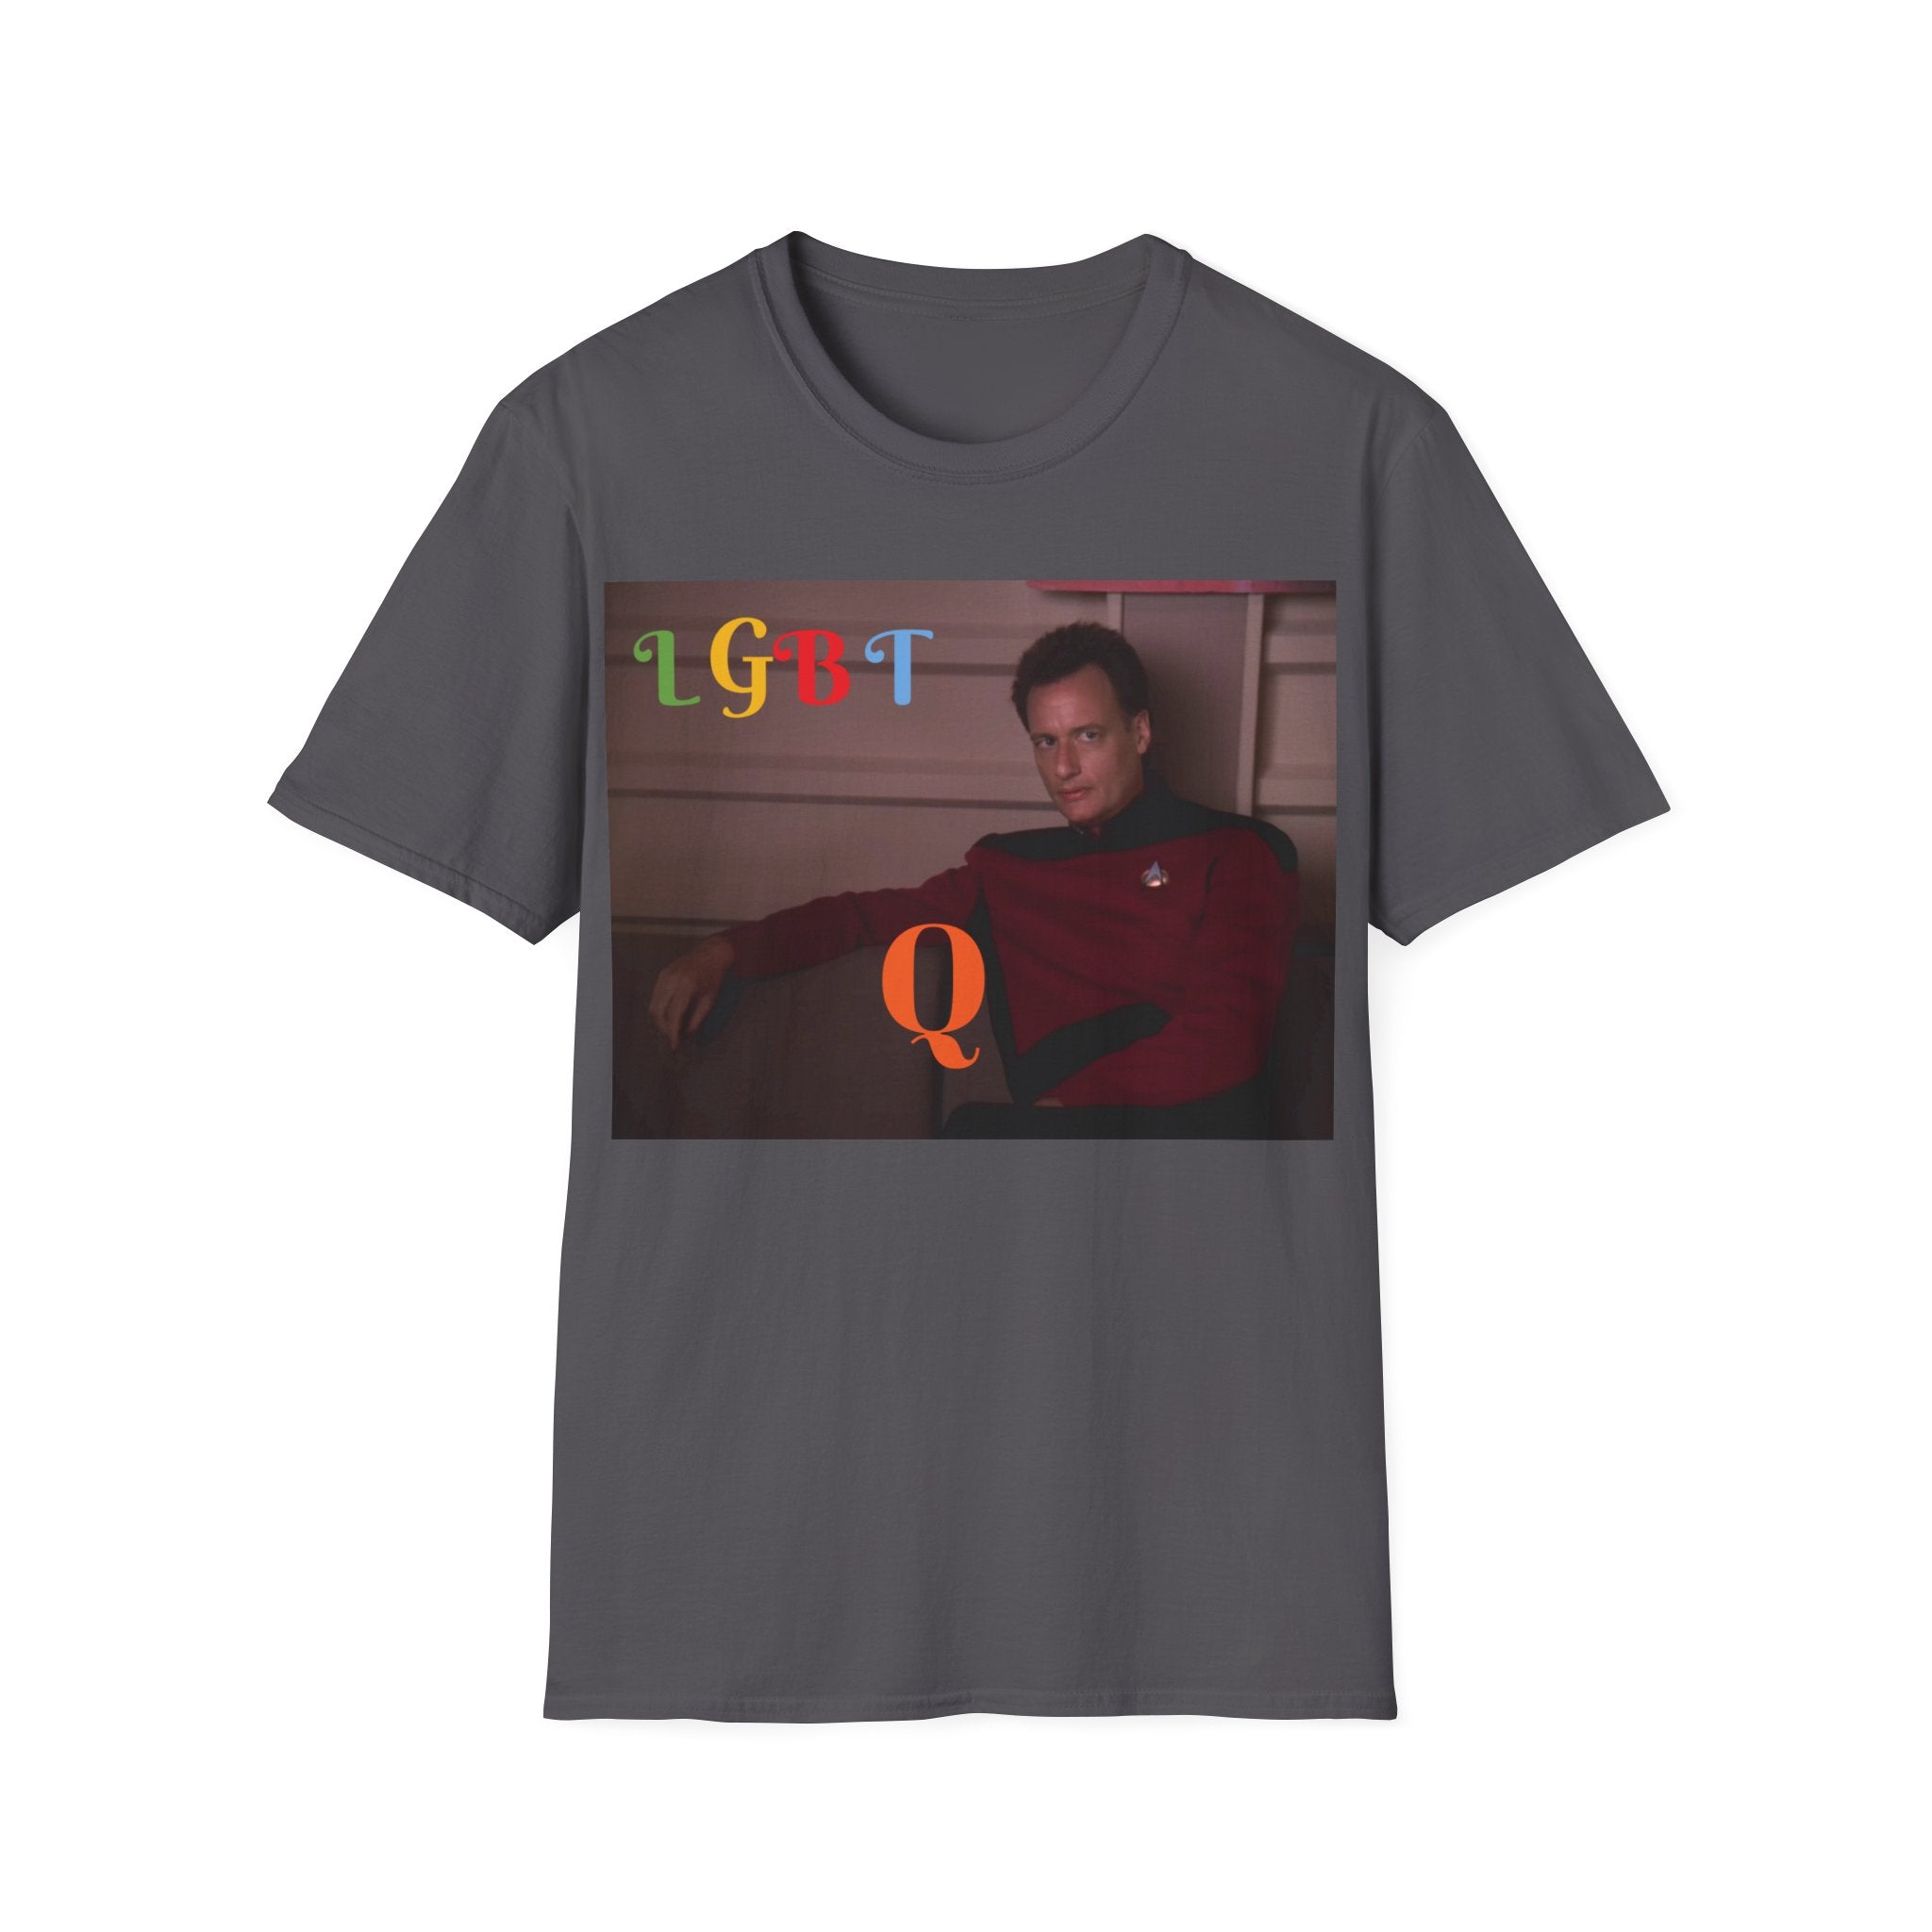 This unique design combines a love for the iconic sci-fi series with a proud nod to LGBTQ support, featuring a humorous twist with the character Q. Perfect for Star Trek fans and members of the LGBTQ community, this shirt is a fun way to show pride and passion for both.